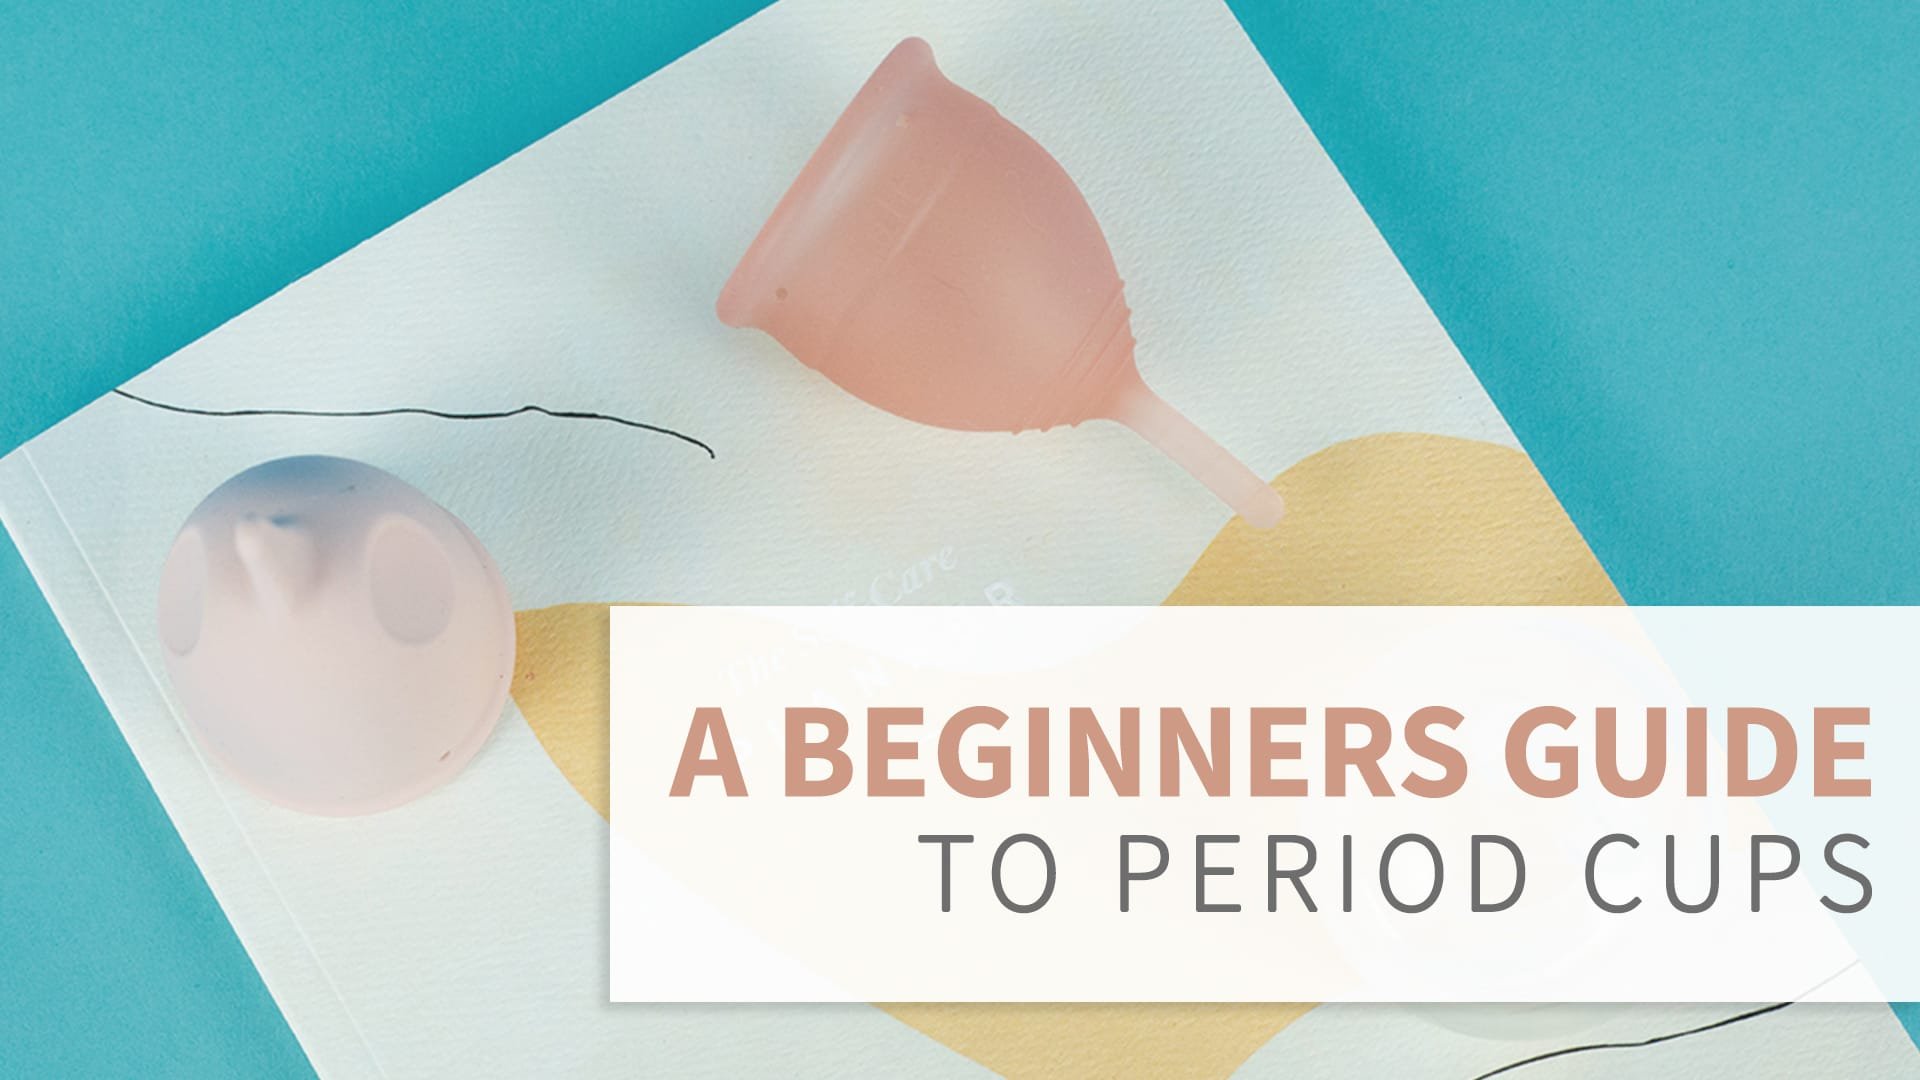 A Beginner's Guide to Menstrual Cups by Put A Cup In It